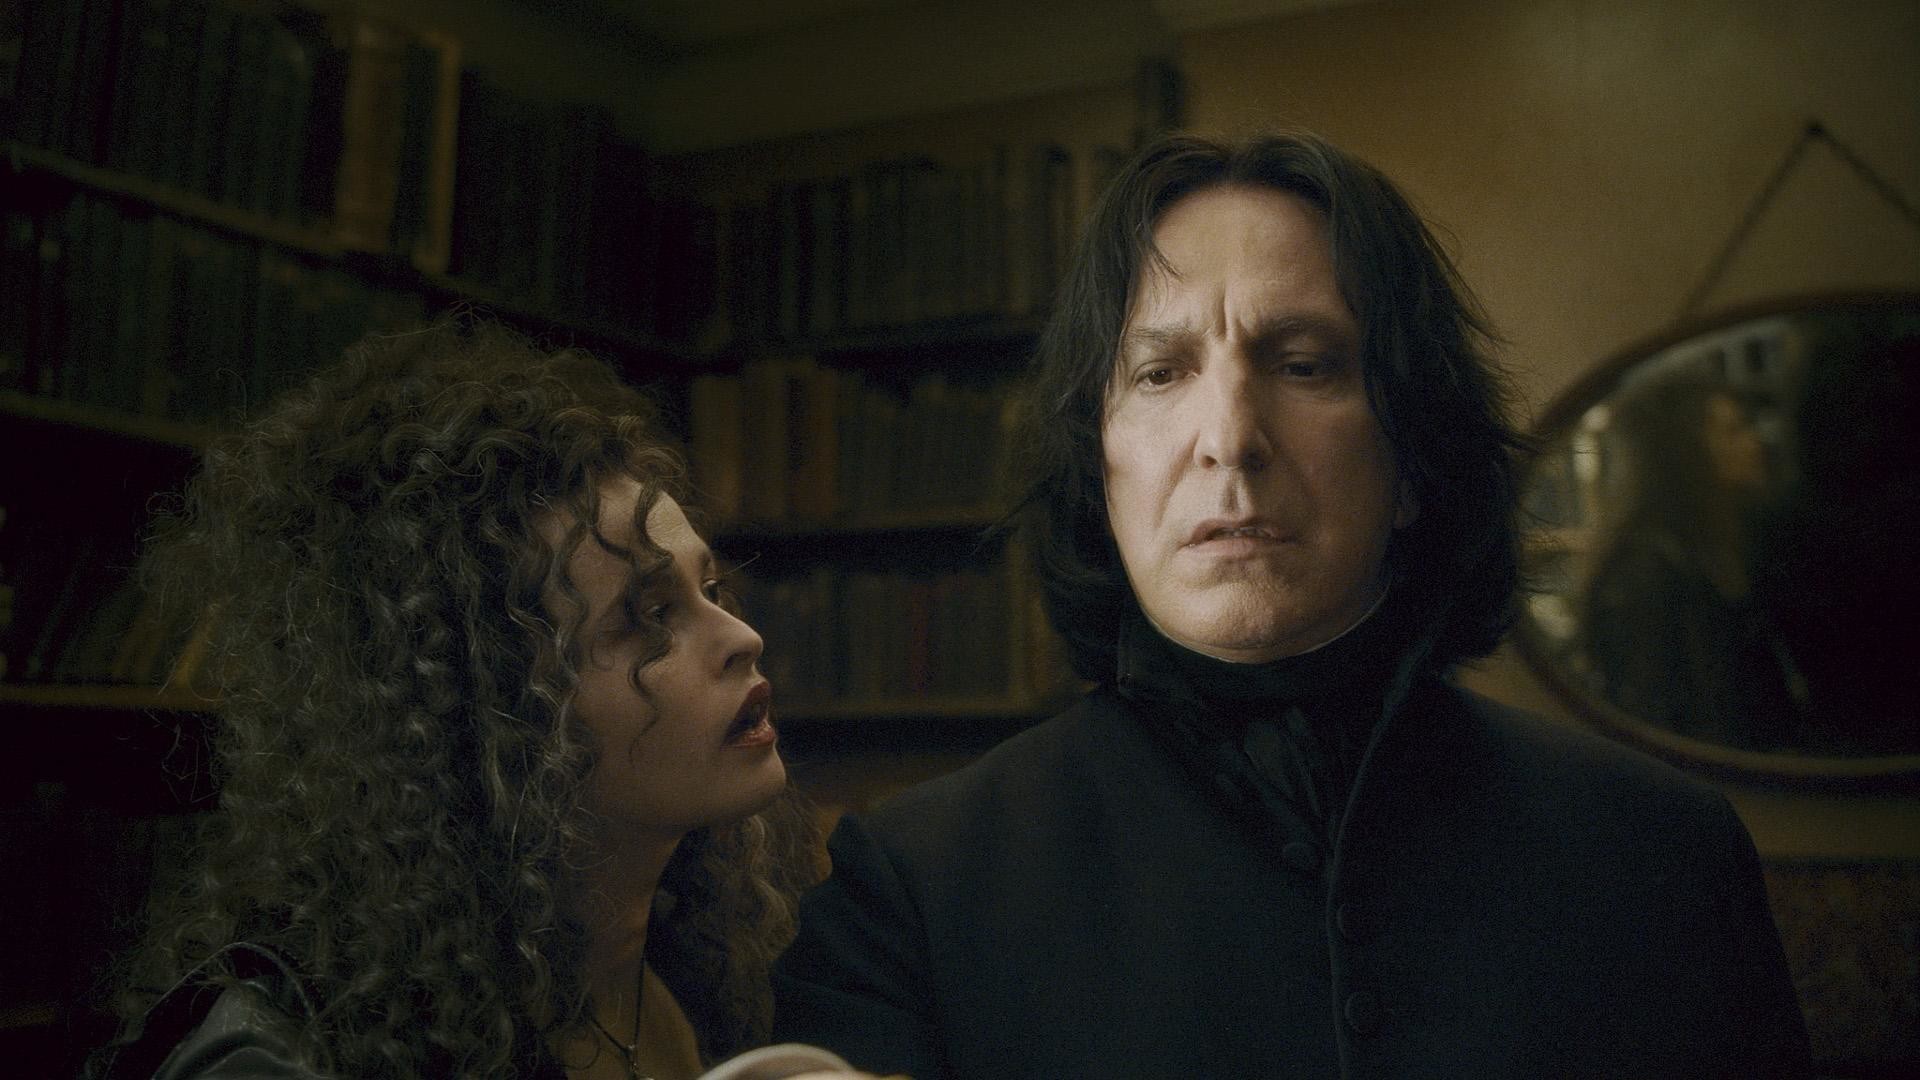 1920x1080 Bellatrix and Snape images Bella/Snape HBP HD wallpaper and background  photos